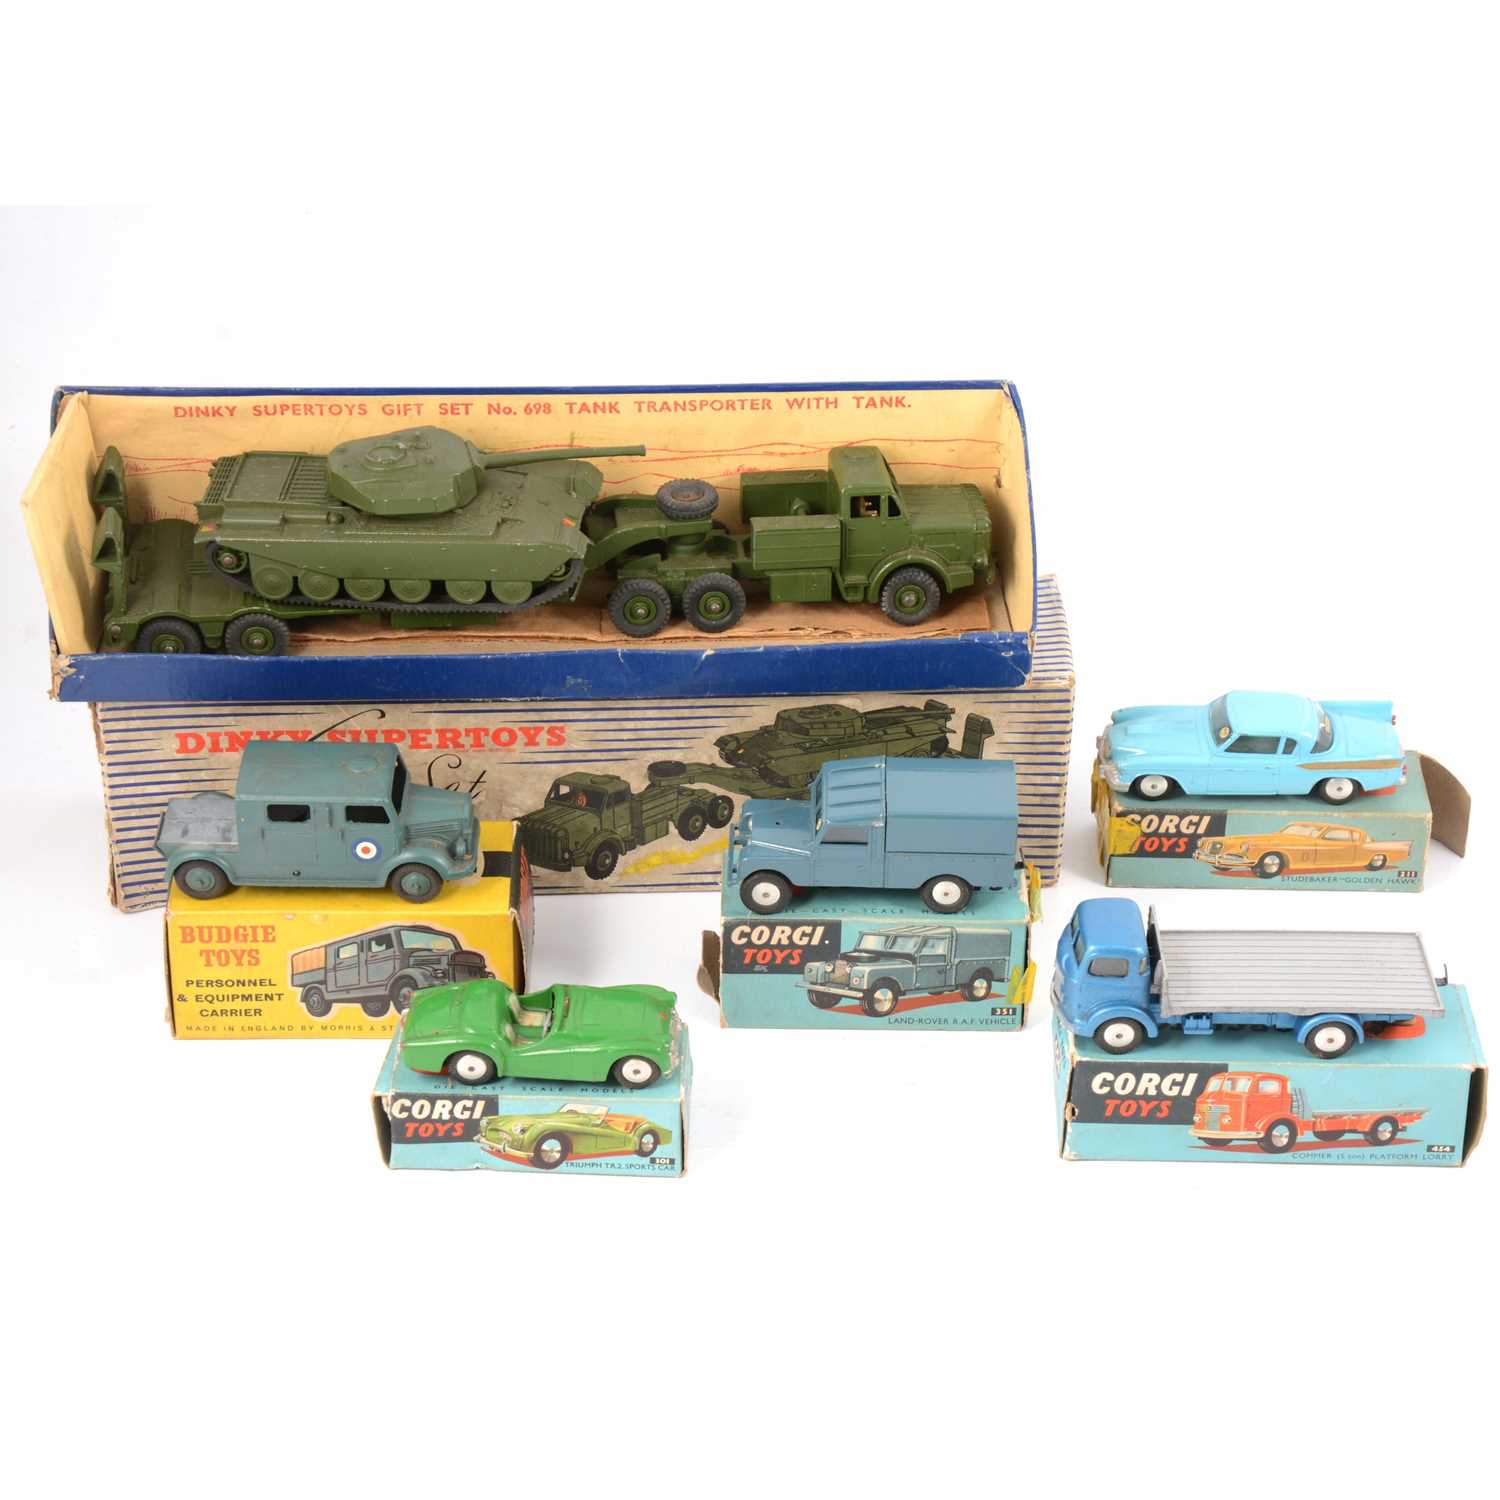 Lot 1080 - Six Die-cast models and vehicles, six including Dinky Supertoys gift set no.698